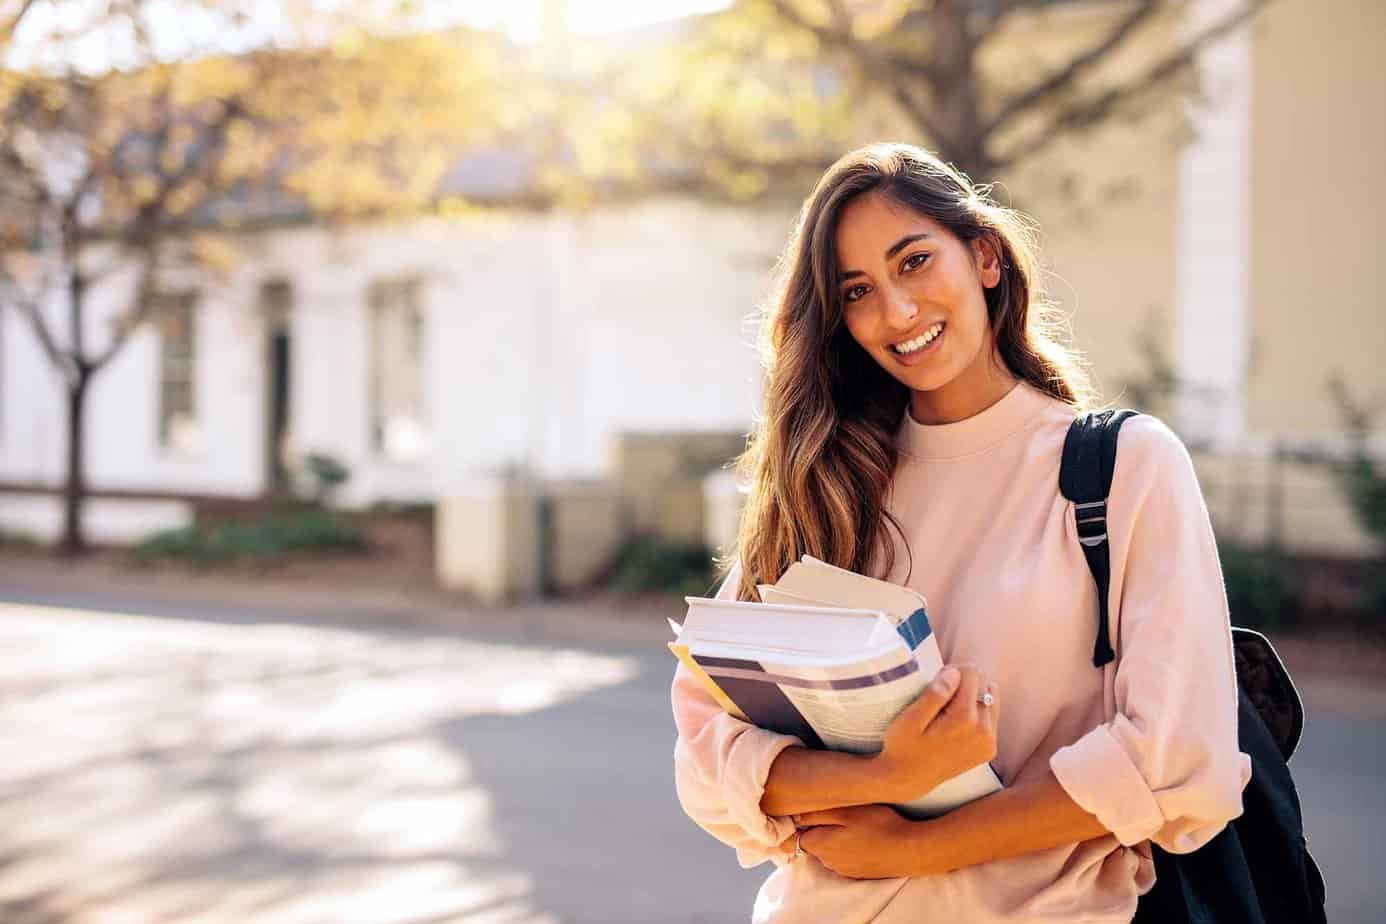 Female college student with backpack smiling while holding books at college campus